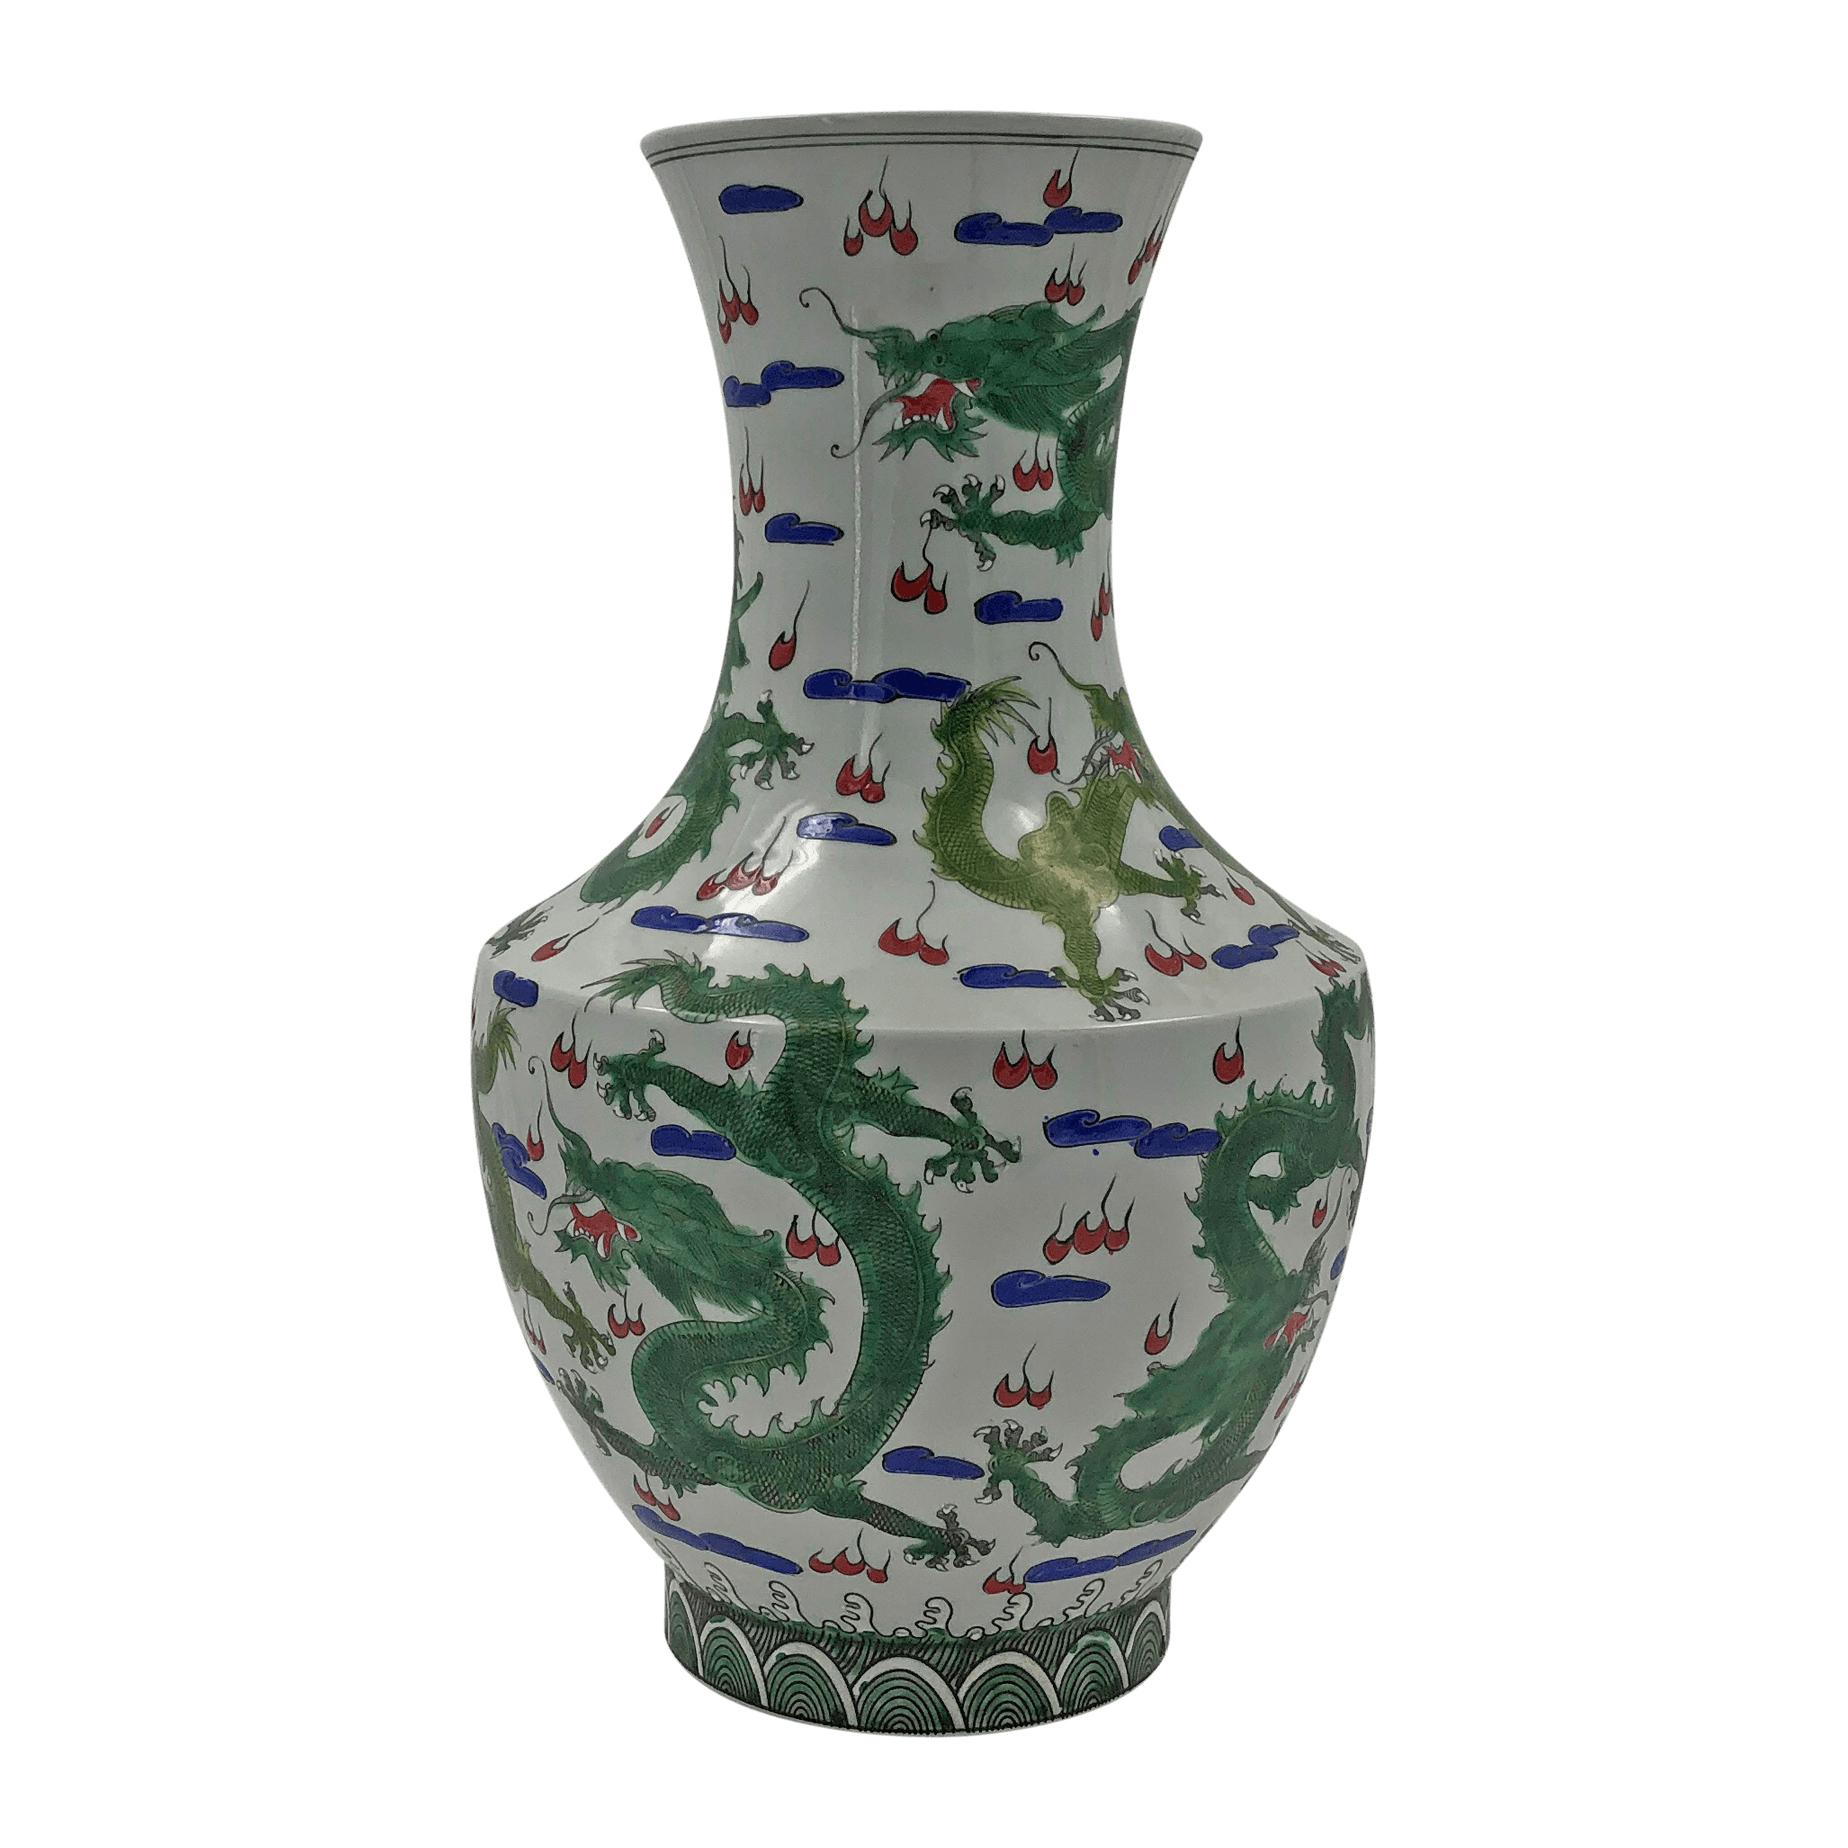 Pair of large Chinese Hu-shaped vases decorated with frolicking dragons in a field.